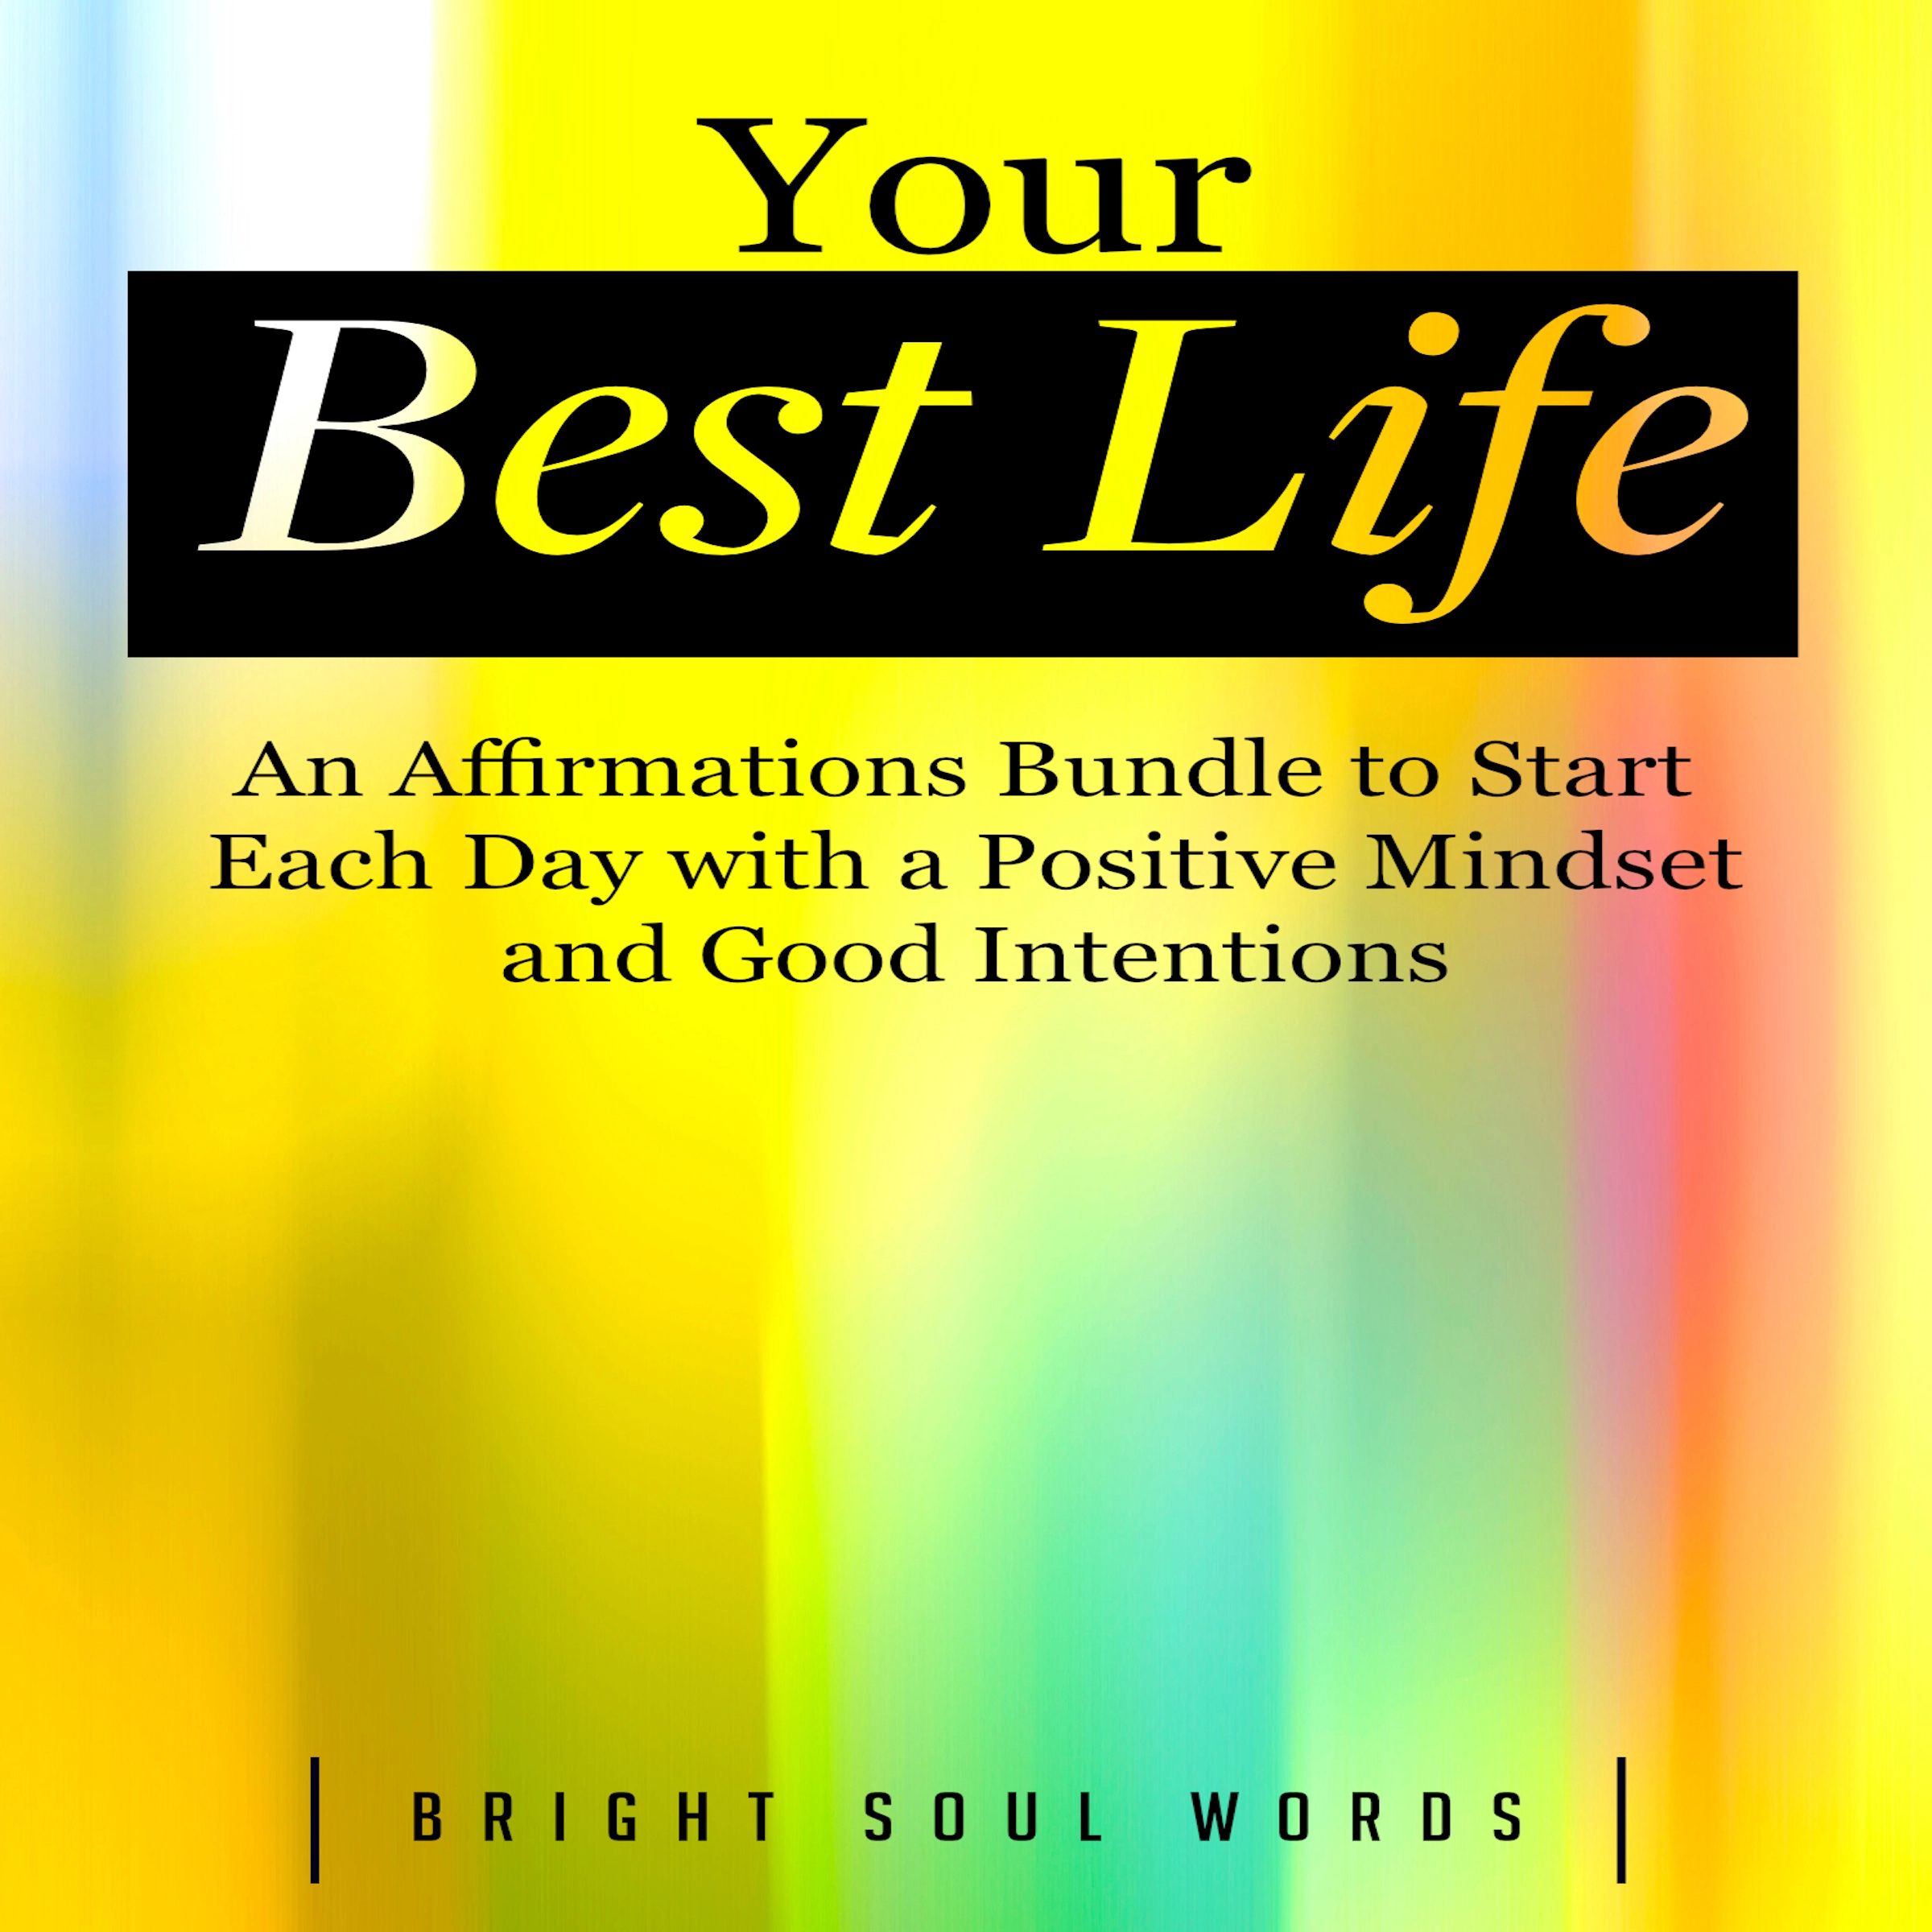 Your Best Life: An Affirmations Bundle to Start Each Day with a Positive Mindset and Good Intentions Audiobook by Bright Soul Words